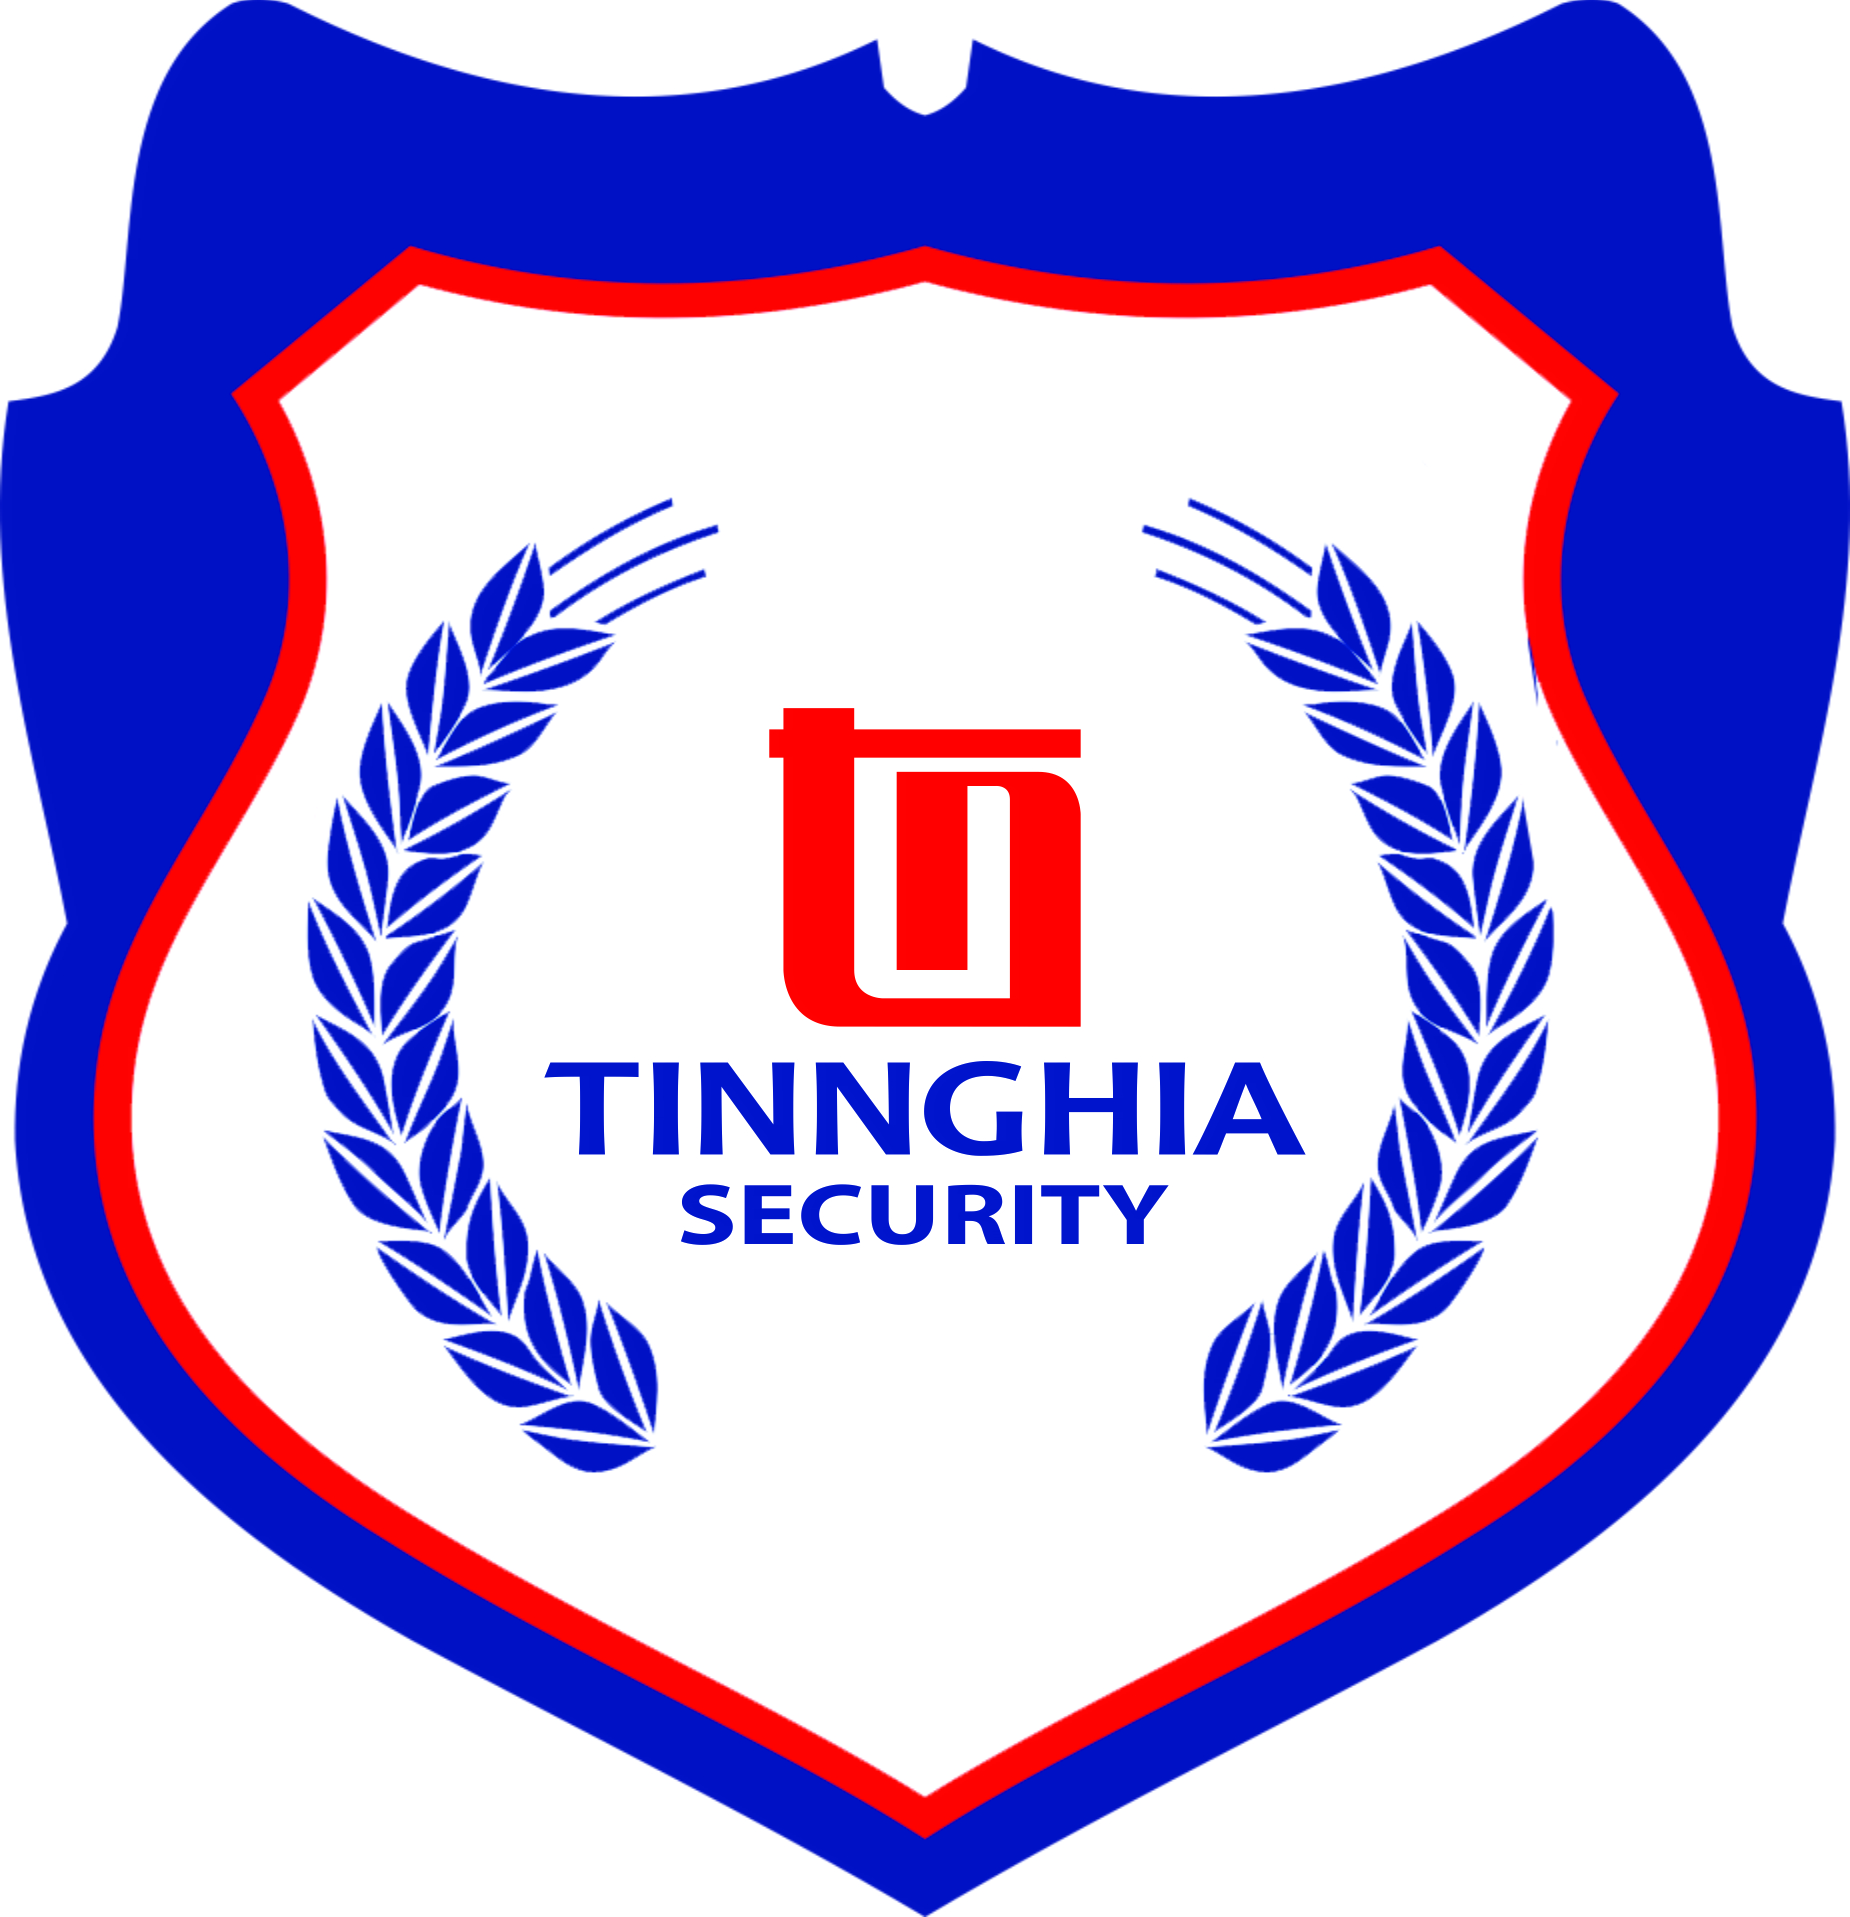 TIN NGHIA PROFESSIONAL SECURITY SERVICES CORPORATION (TSC)